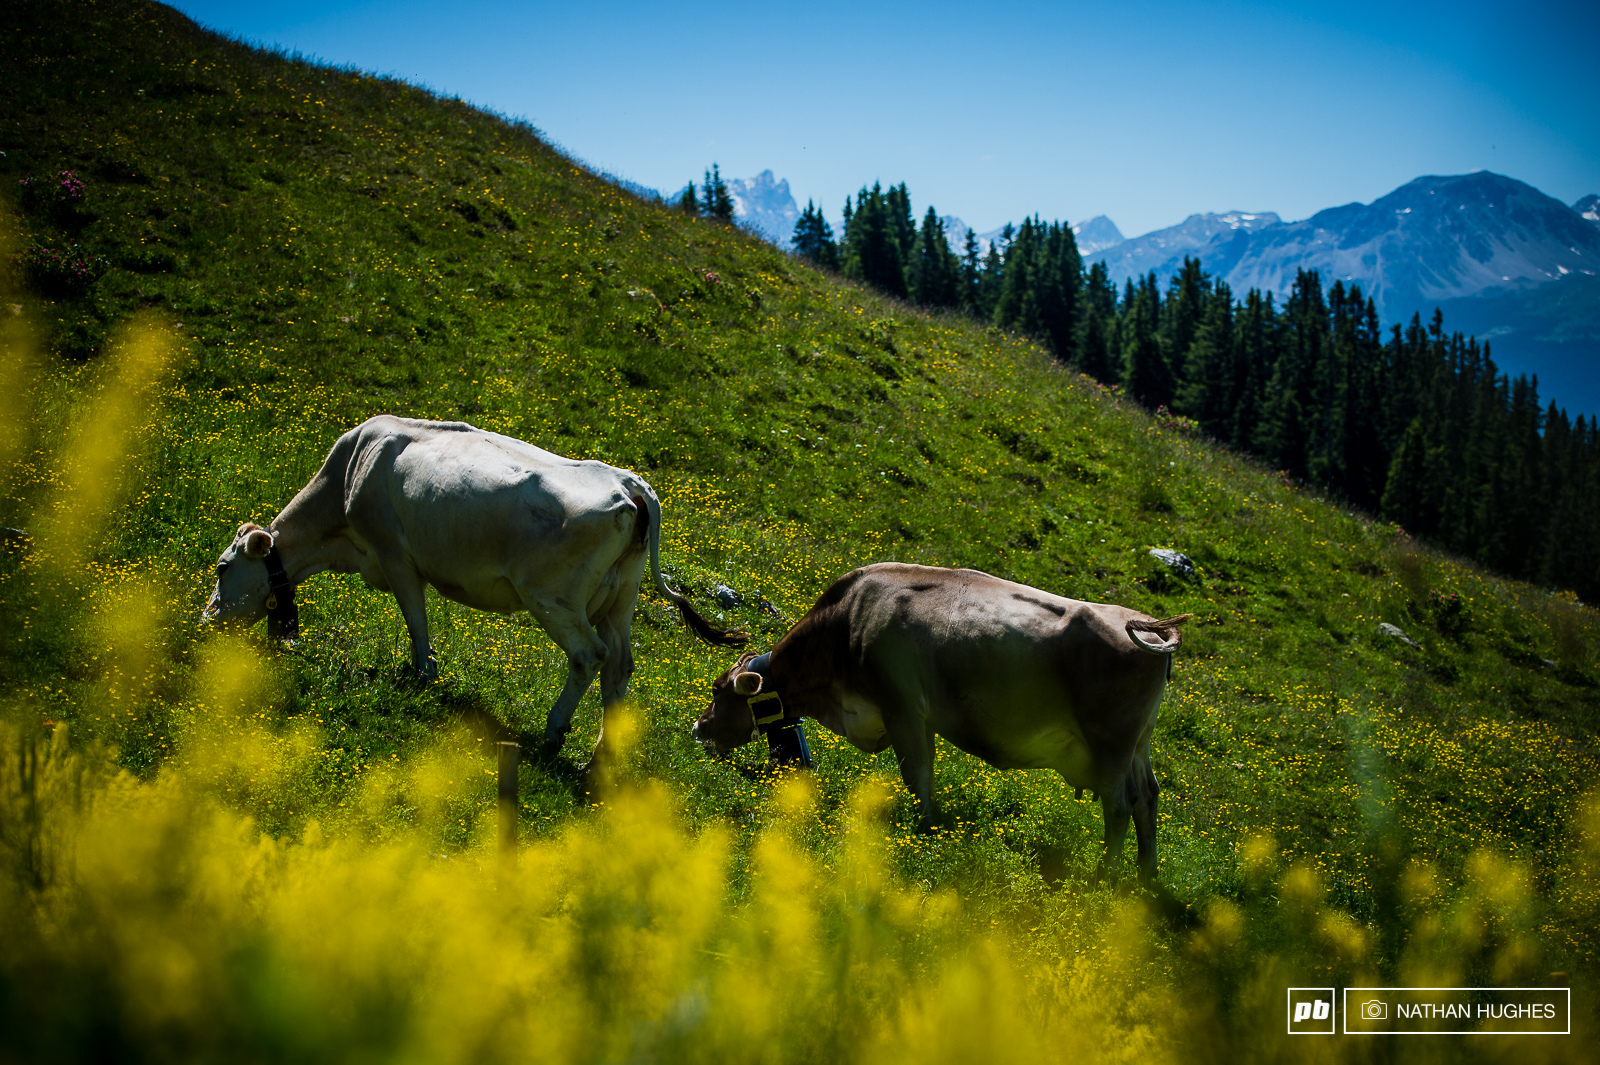 Beautiful golden flowers and epic mountains. What more could you want? More cowbell perhaps...